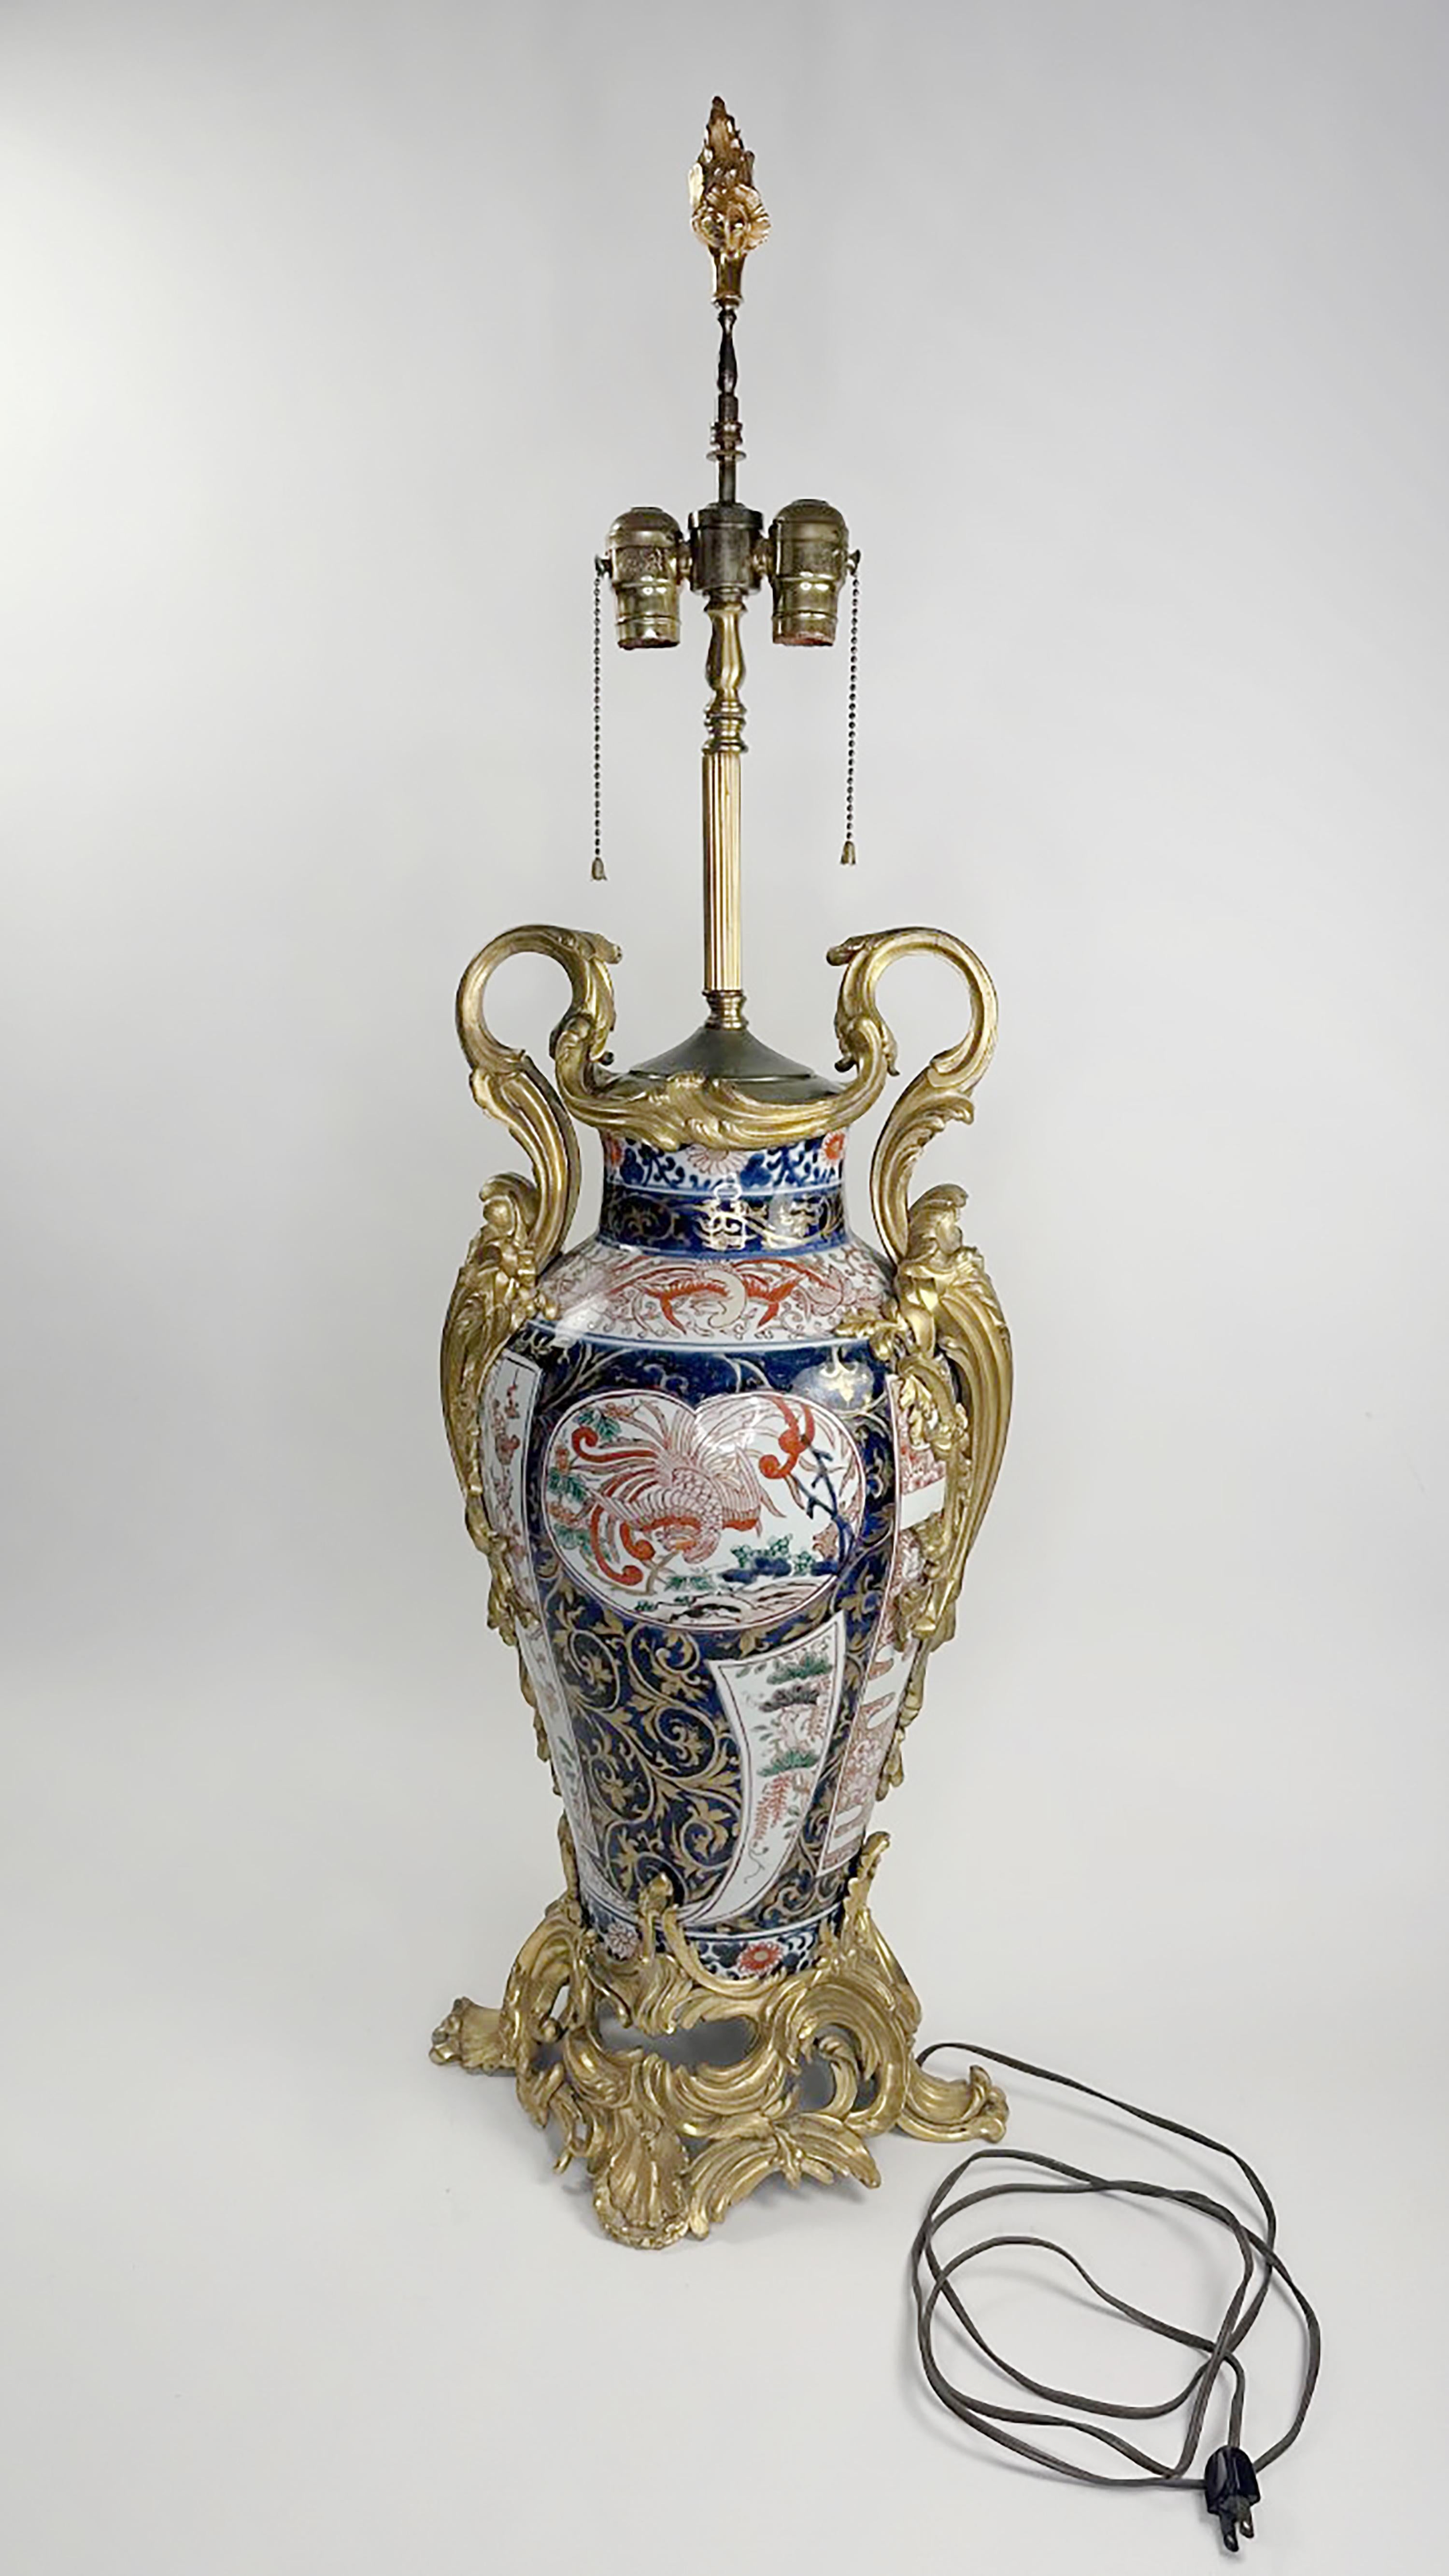 A continental porcelain Imari style urn. repurposed as an Arita-yaki lamp. The center is a wide oval shape. The sides, top, and bottom are ornate with Ormolu detail in lush organic florals. Scrolled double snake handles.  Circa late 19th Century.